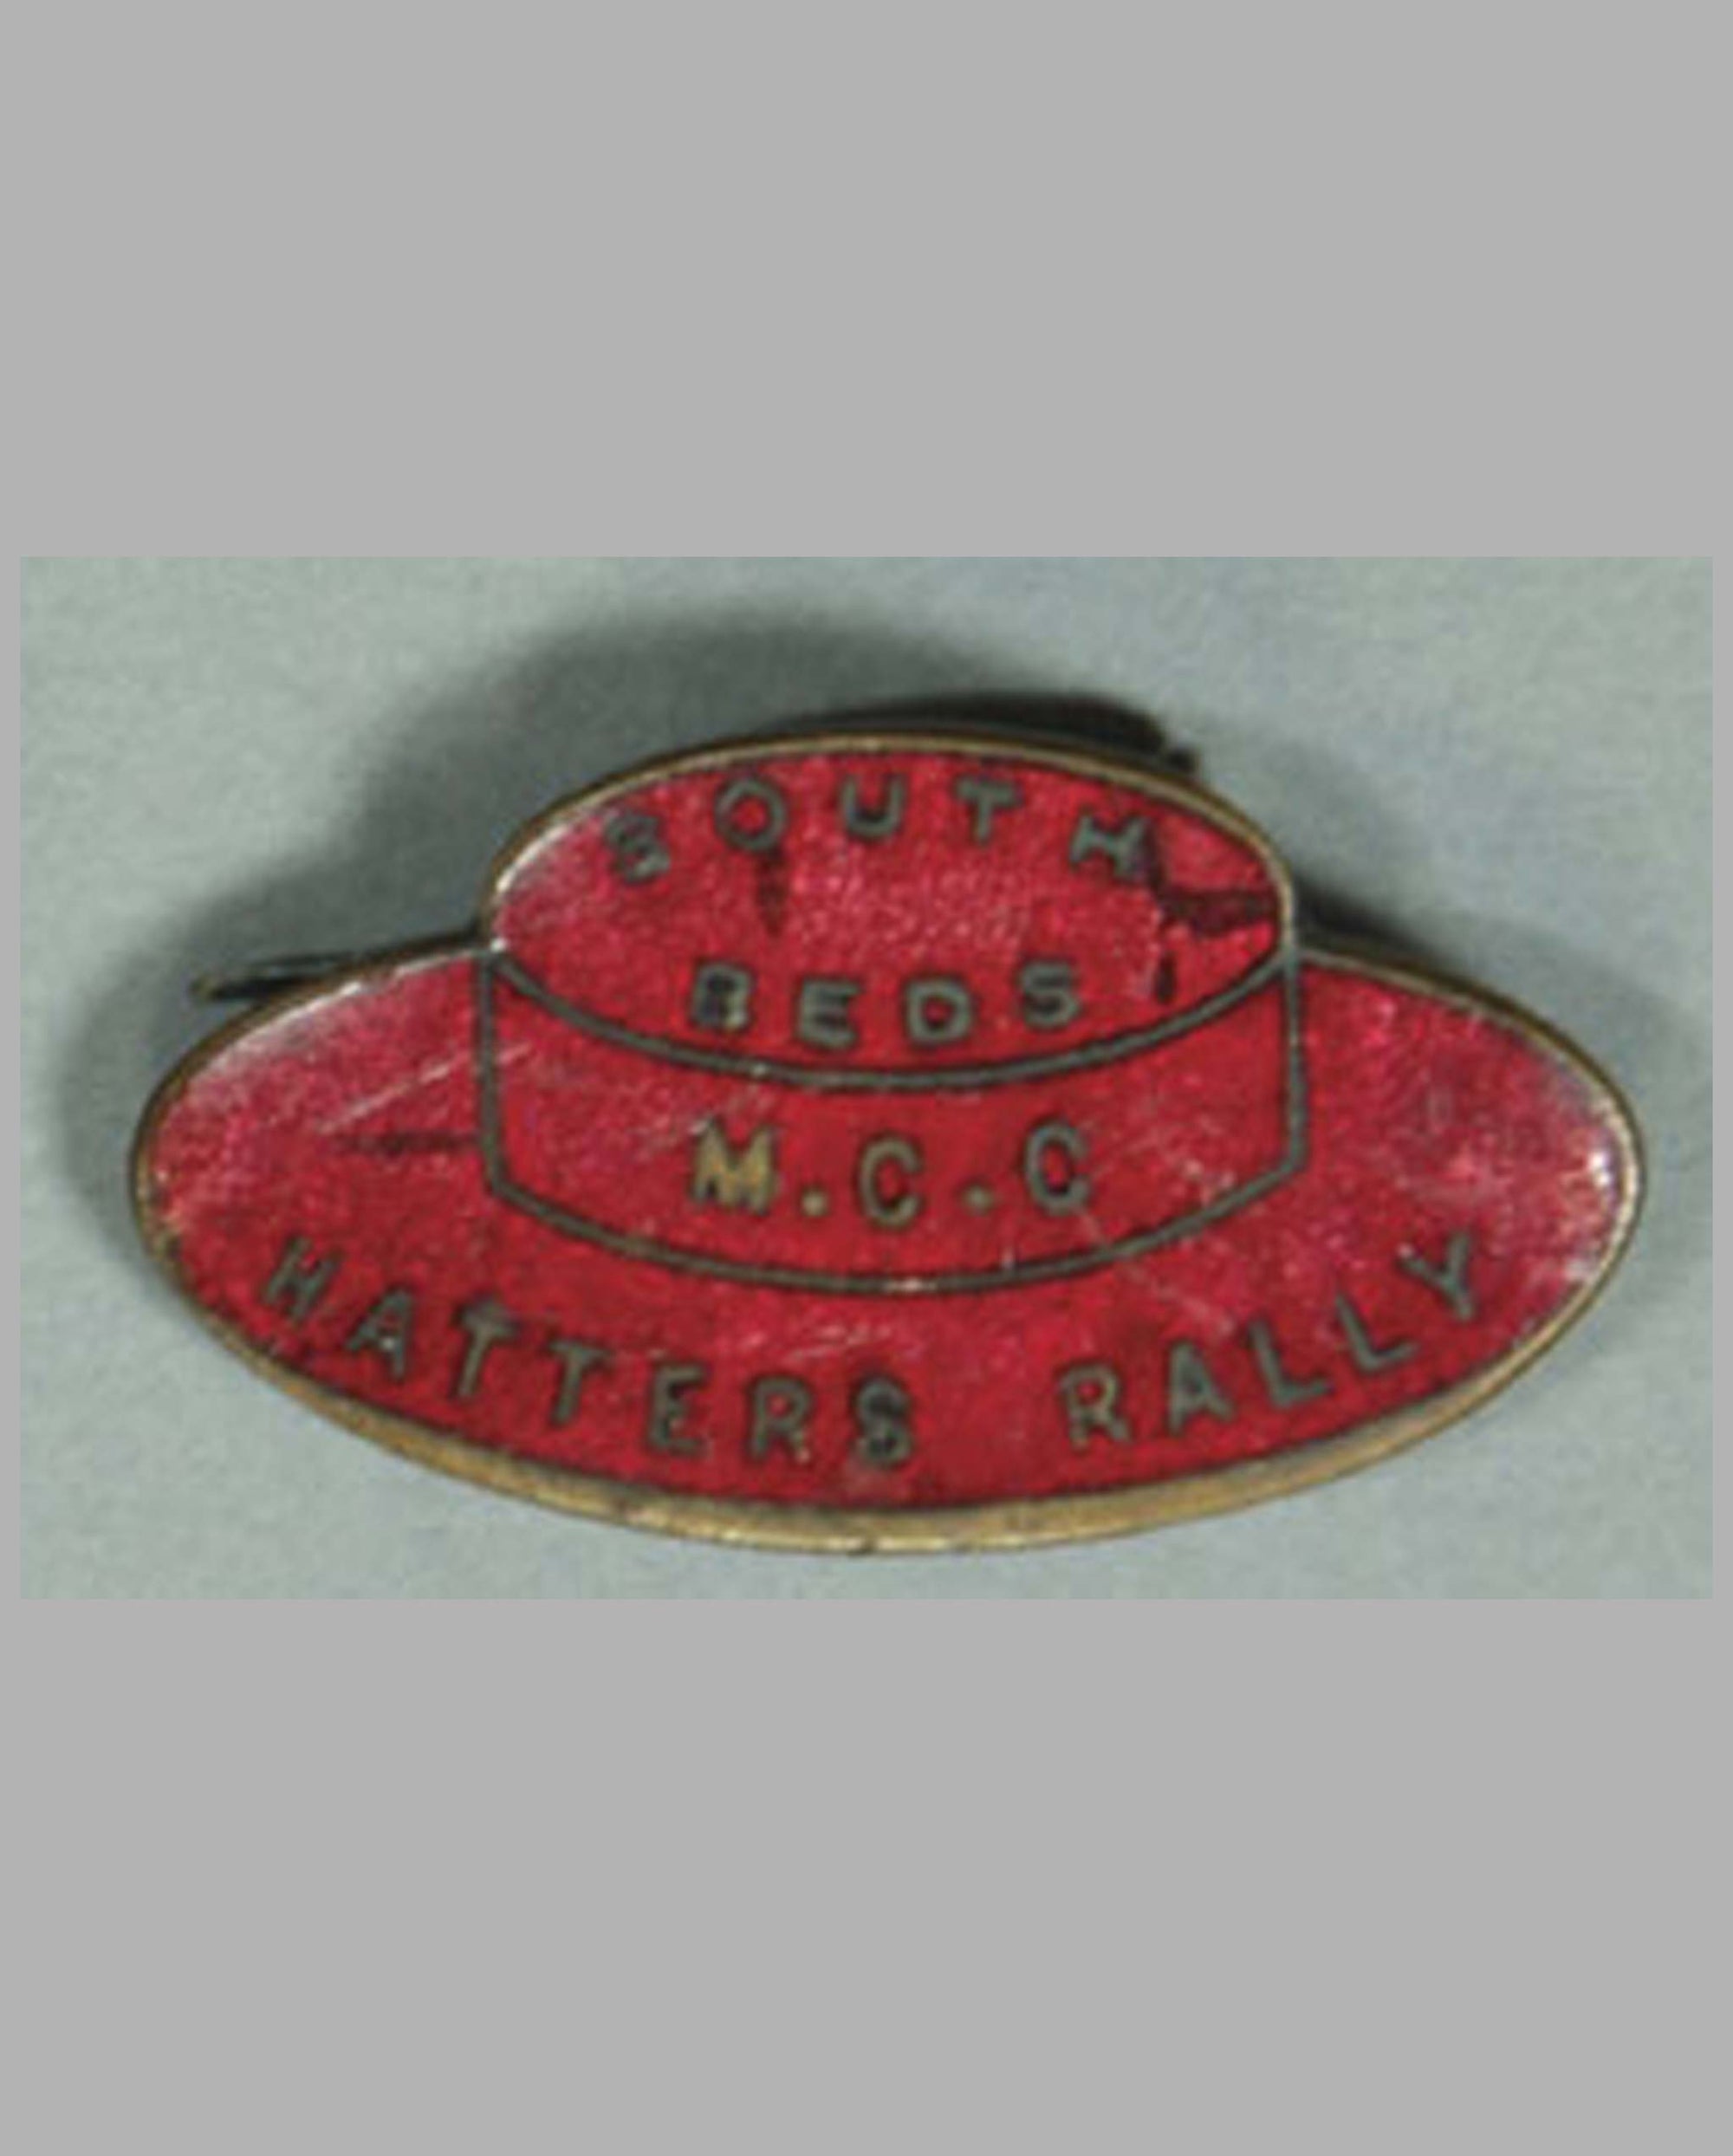 South Beds MCC Hatters Rally participant's pin